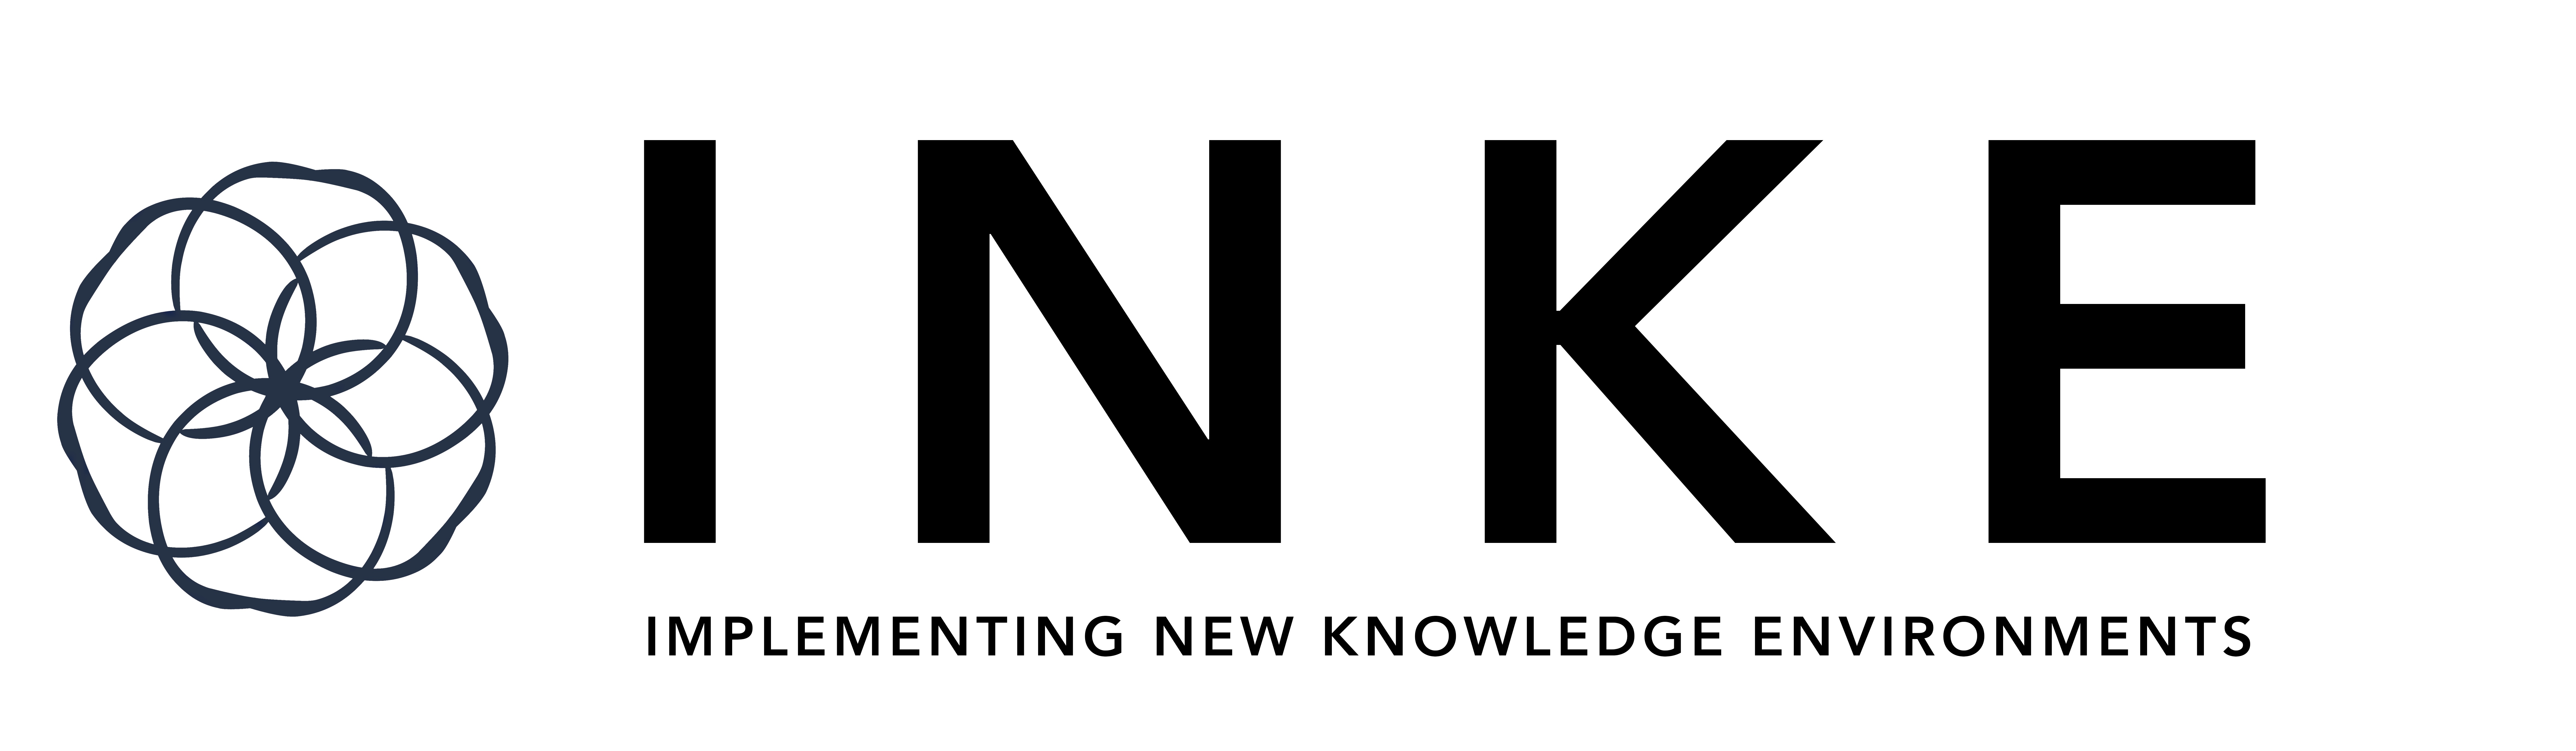 Implementing New Knowledge Environments